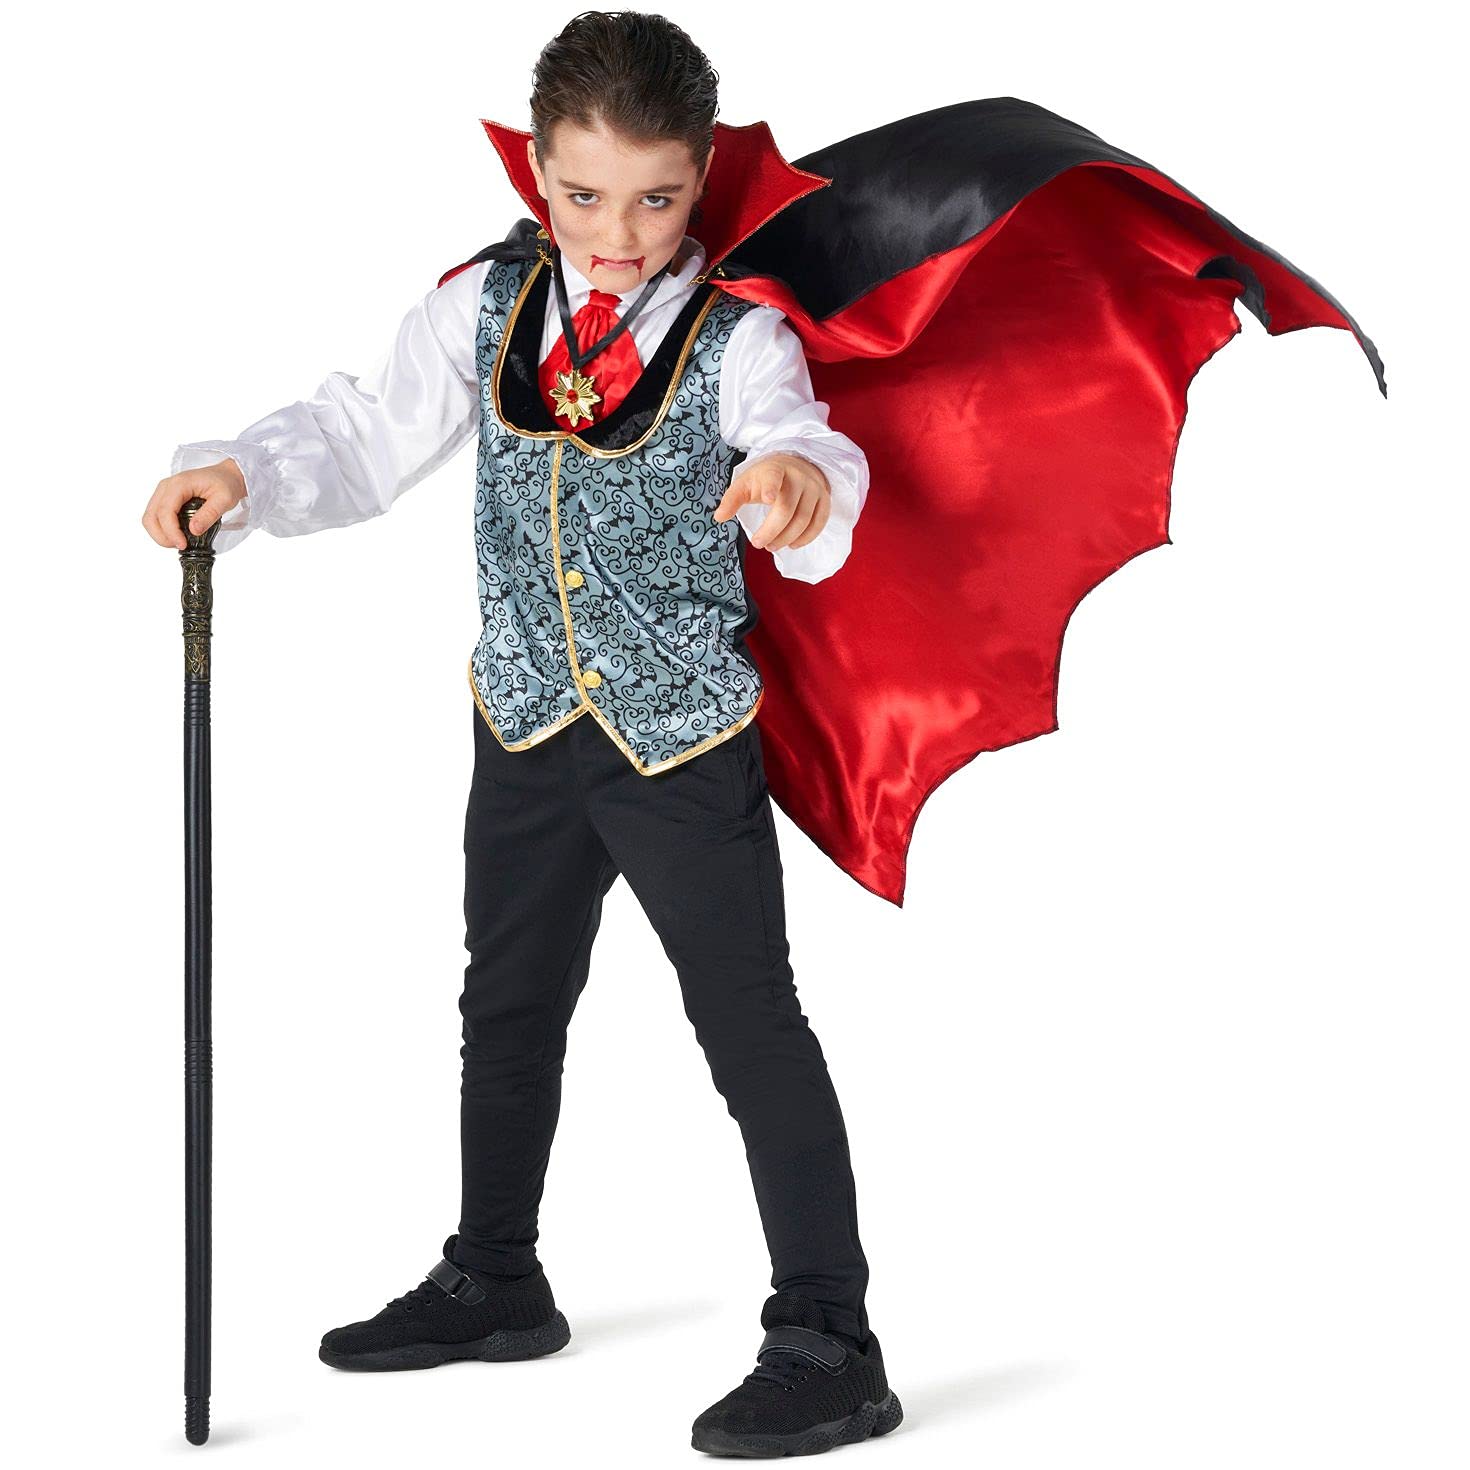 Morph costumes Kids Vampire costume Boys Vampire cape Dracula Outfit Toddler Scary Halloween costume For Boys XL